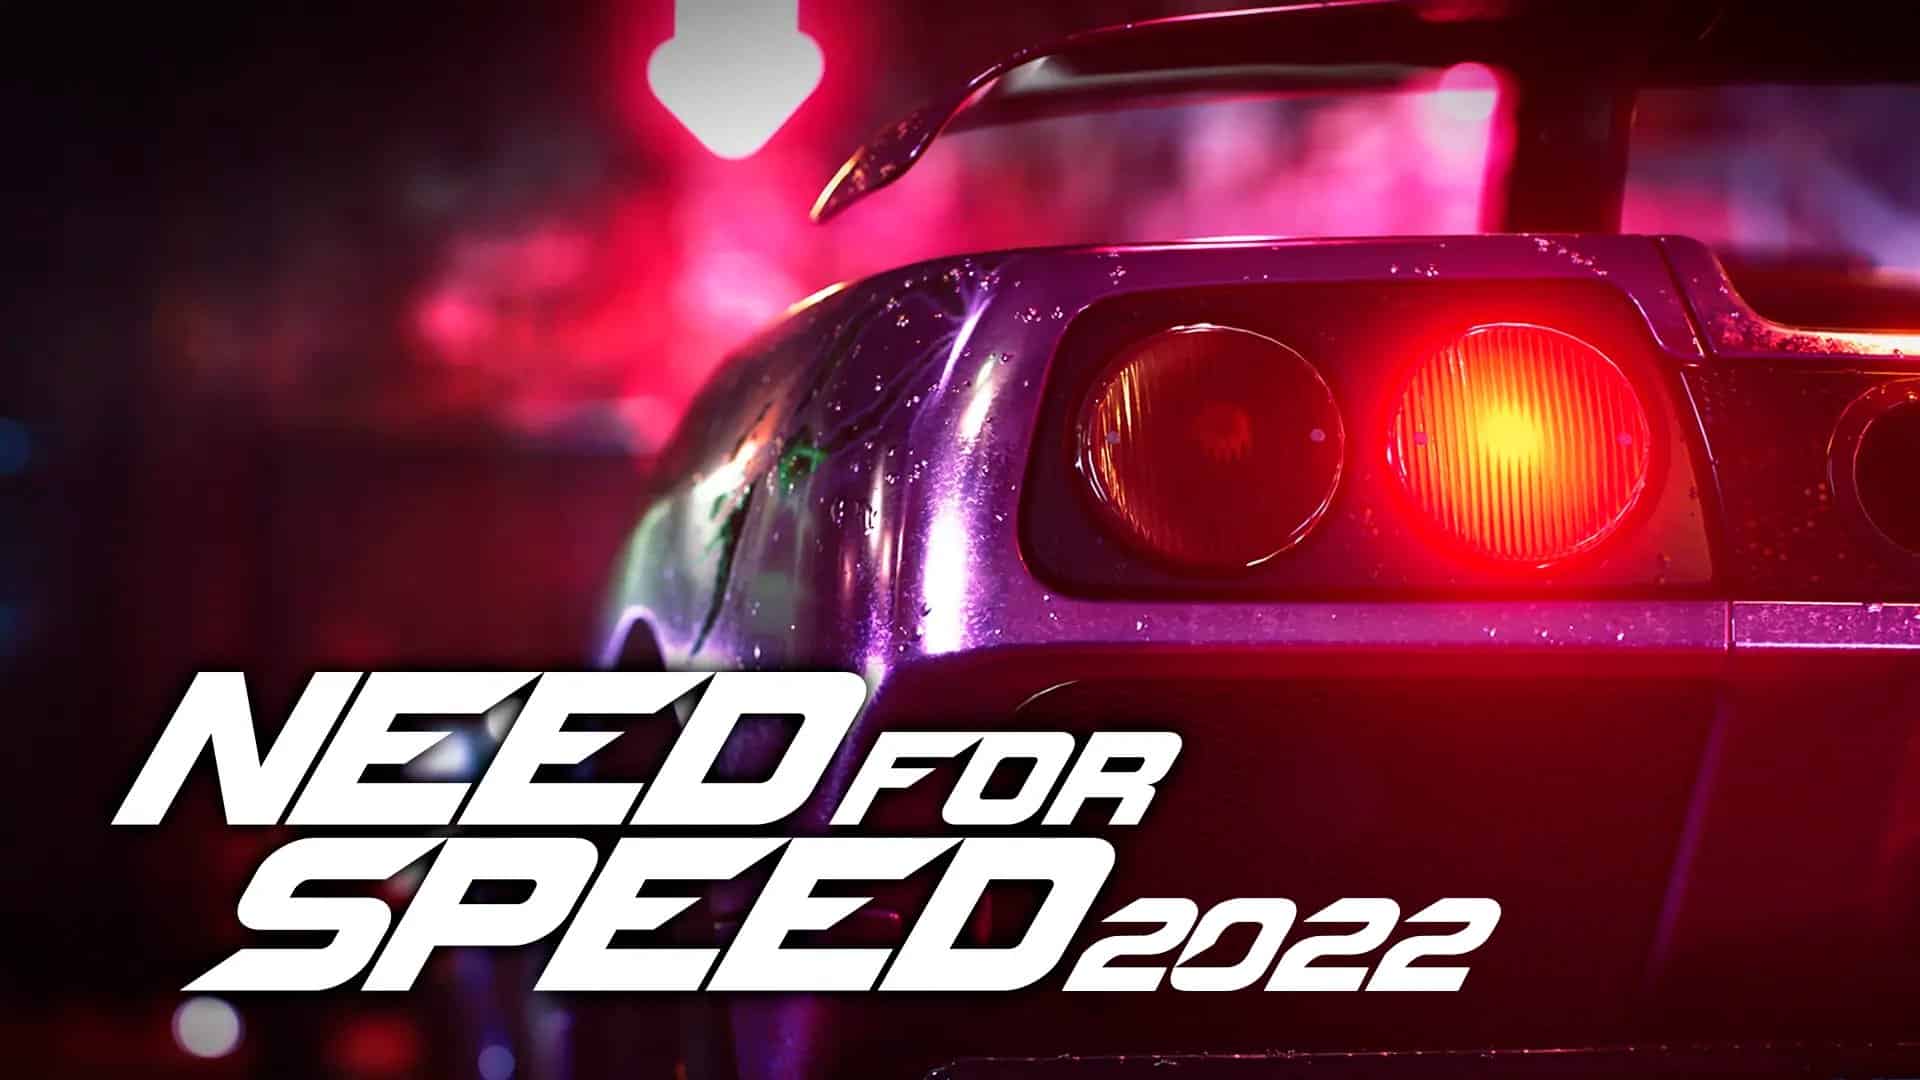 Need for Speed 2022 Characters and Mechanics Leaked 